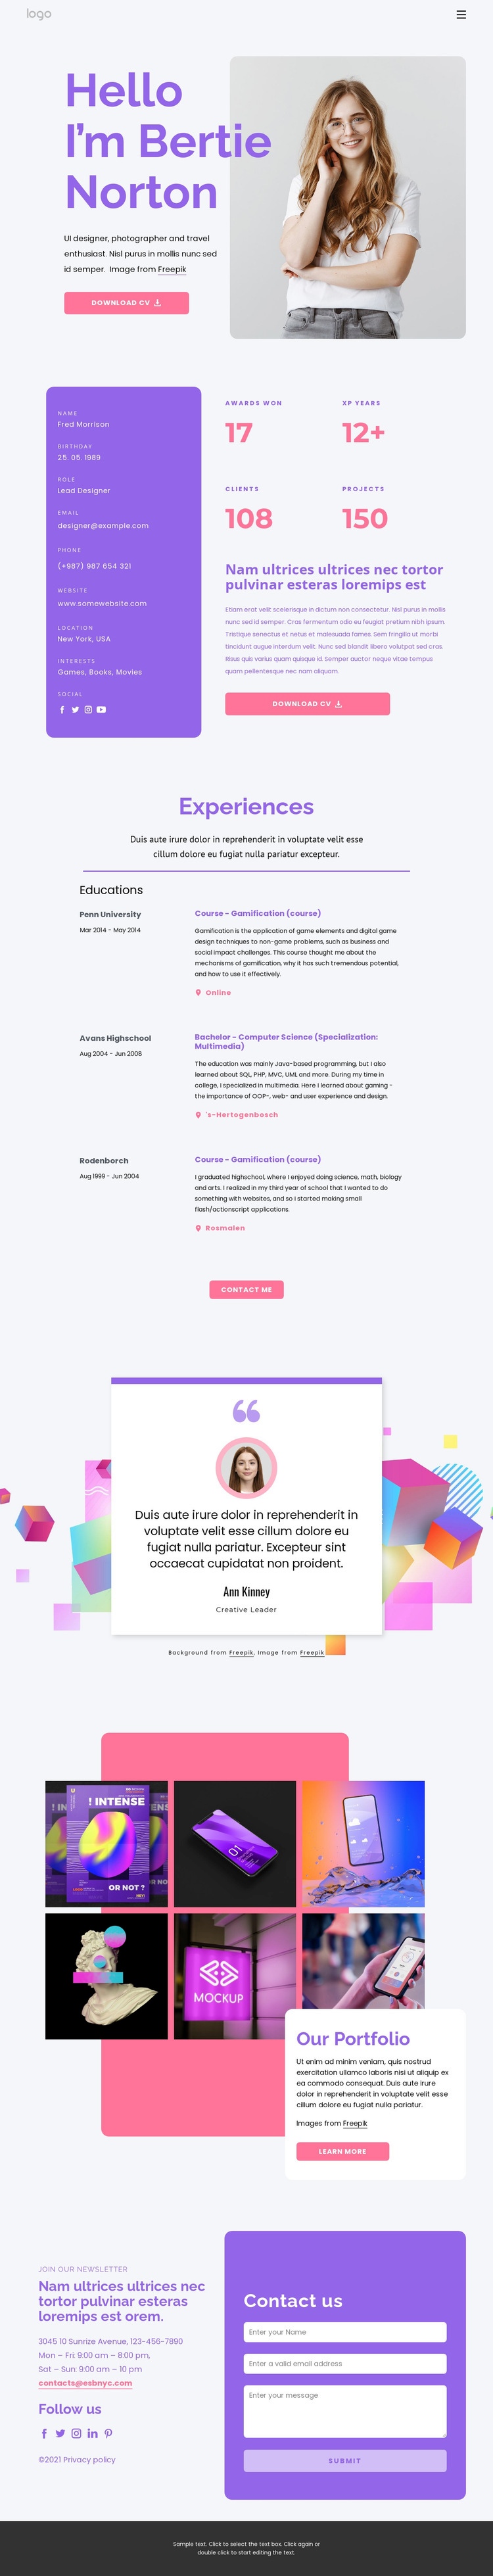 Personal website Web Page Design